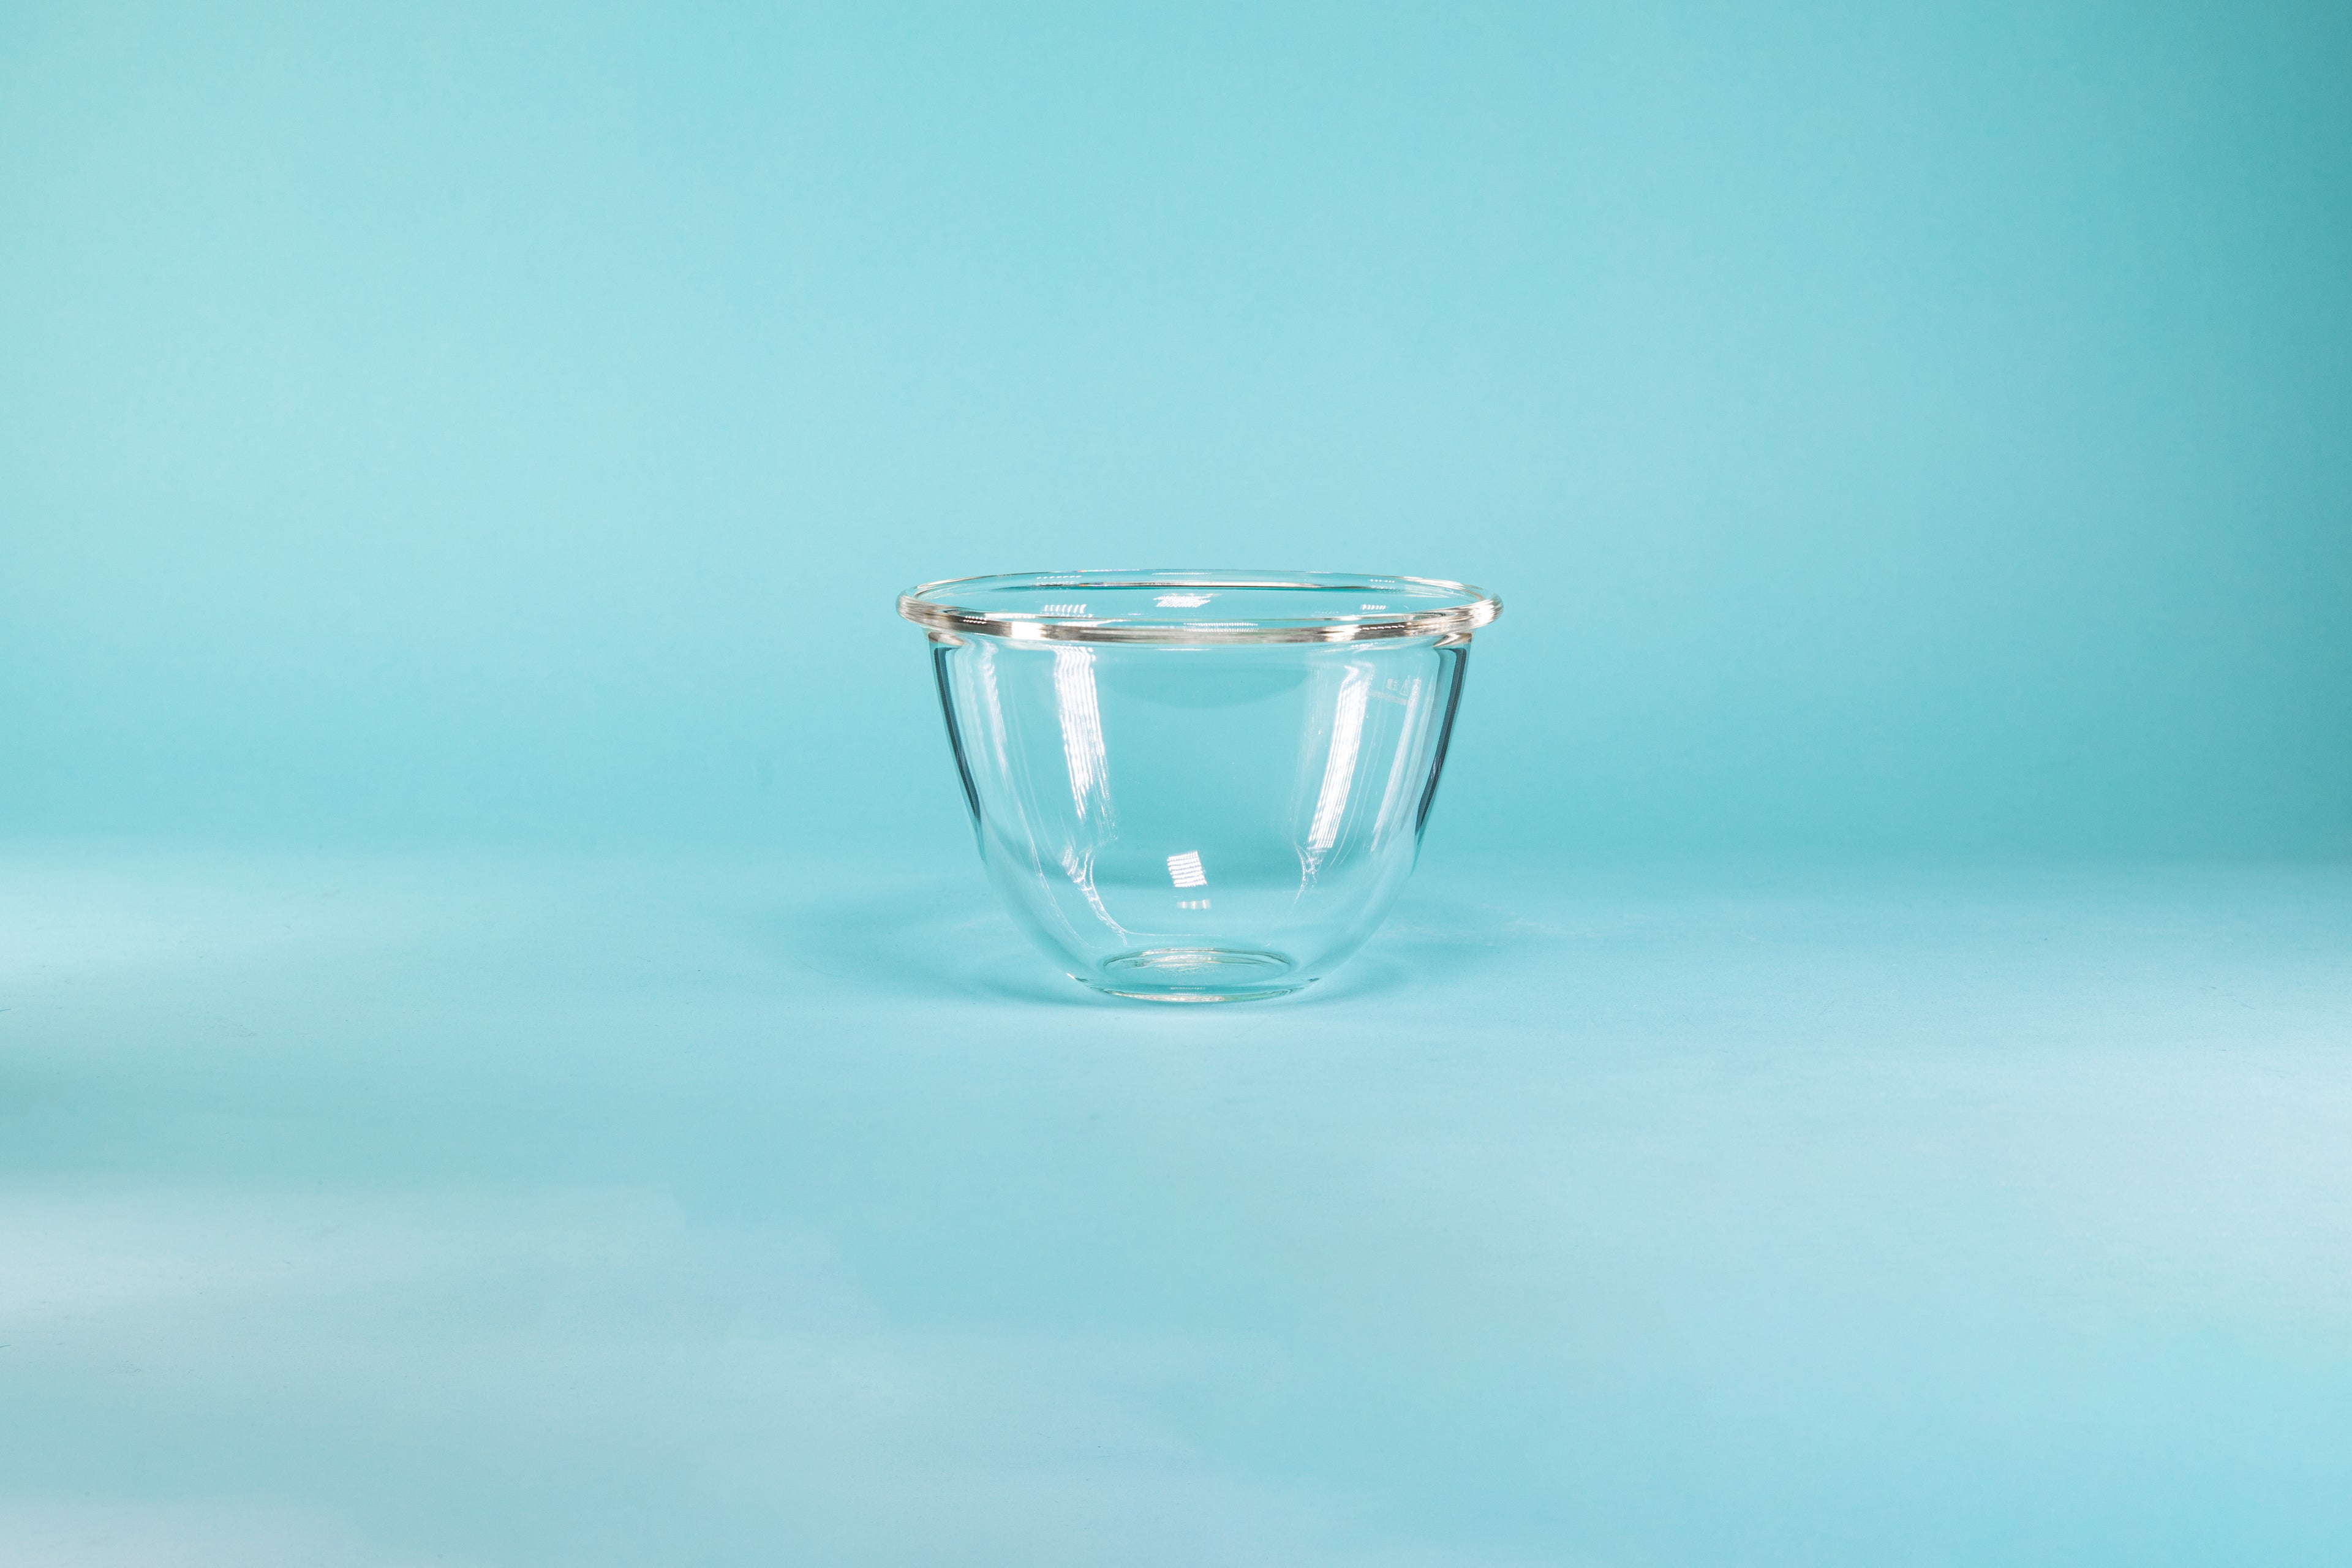 Glass mixing bowl on a blue background.